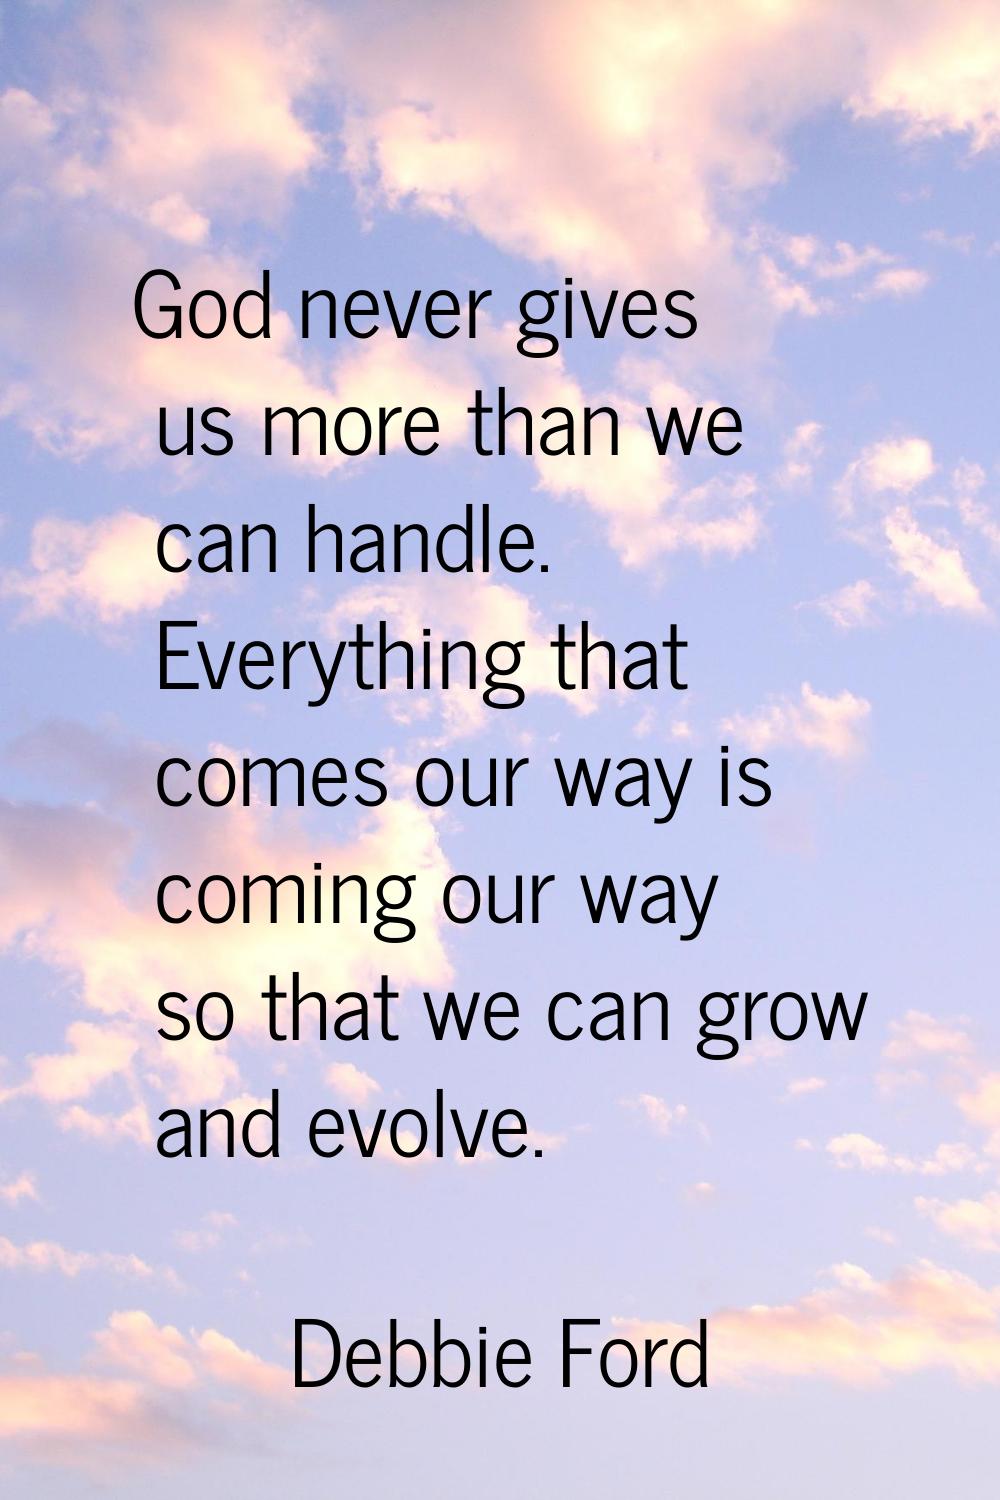 God never gives us more than we can handle. Everything that comes our way is coming our way so that